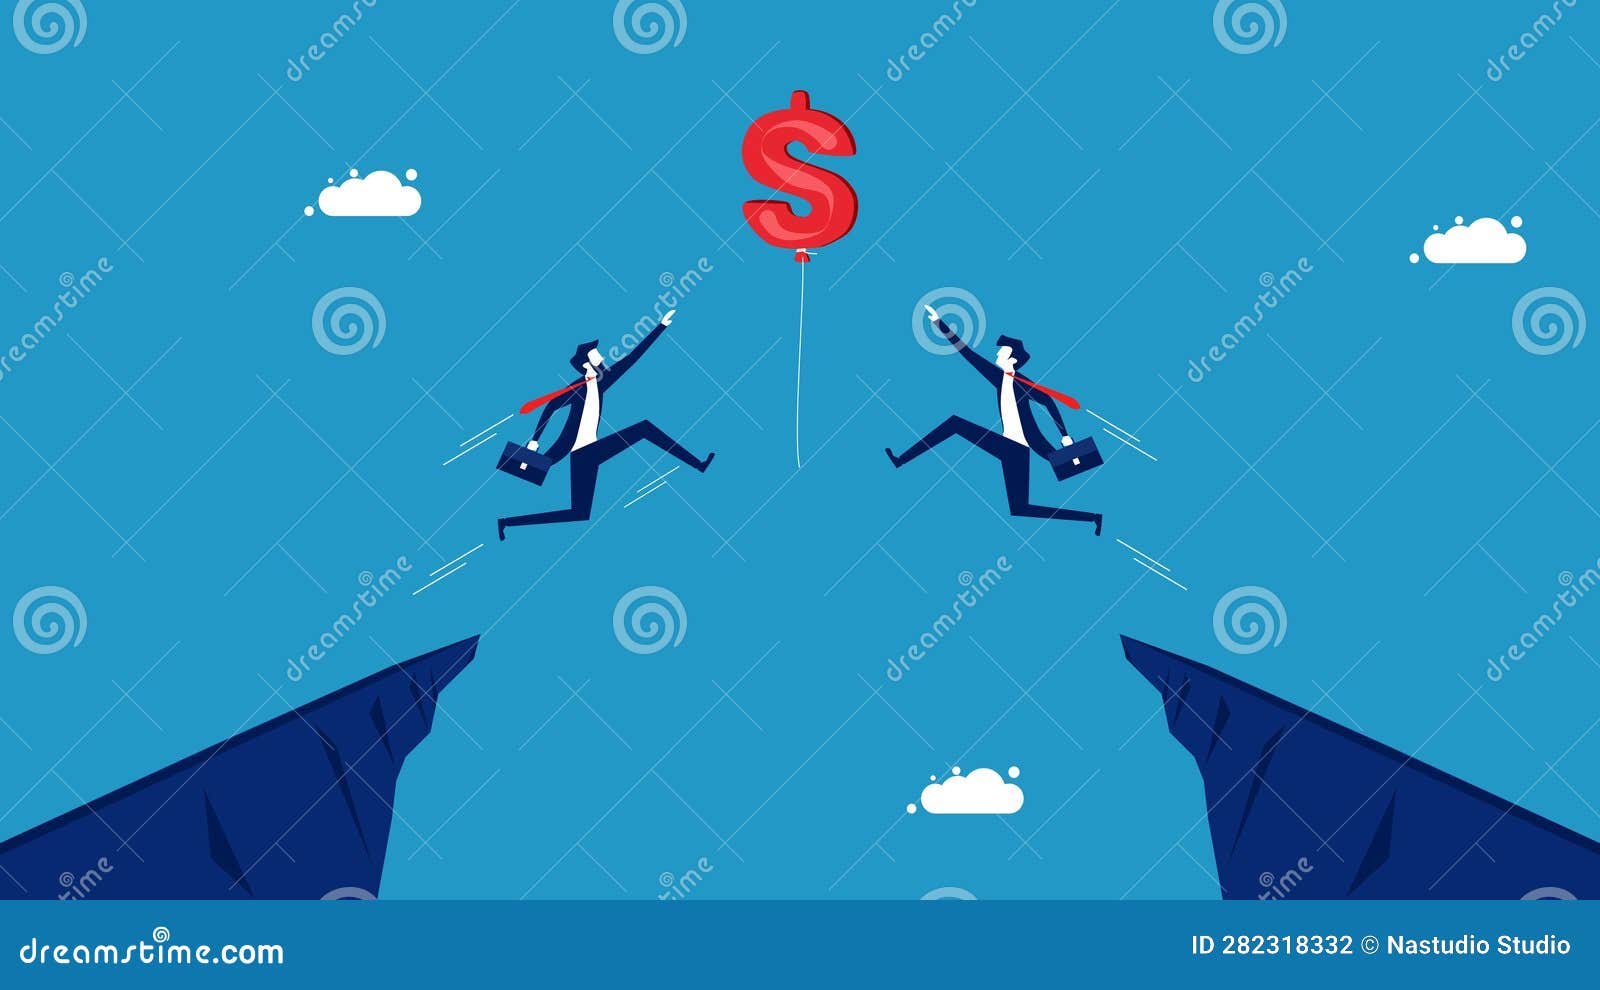 business competition for business benefits. two businessmen jumping vying for dollar balloon